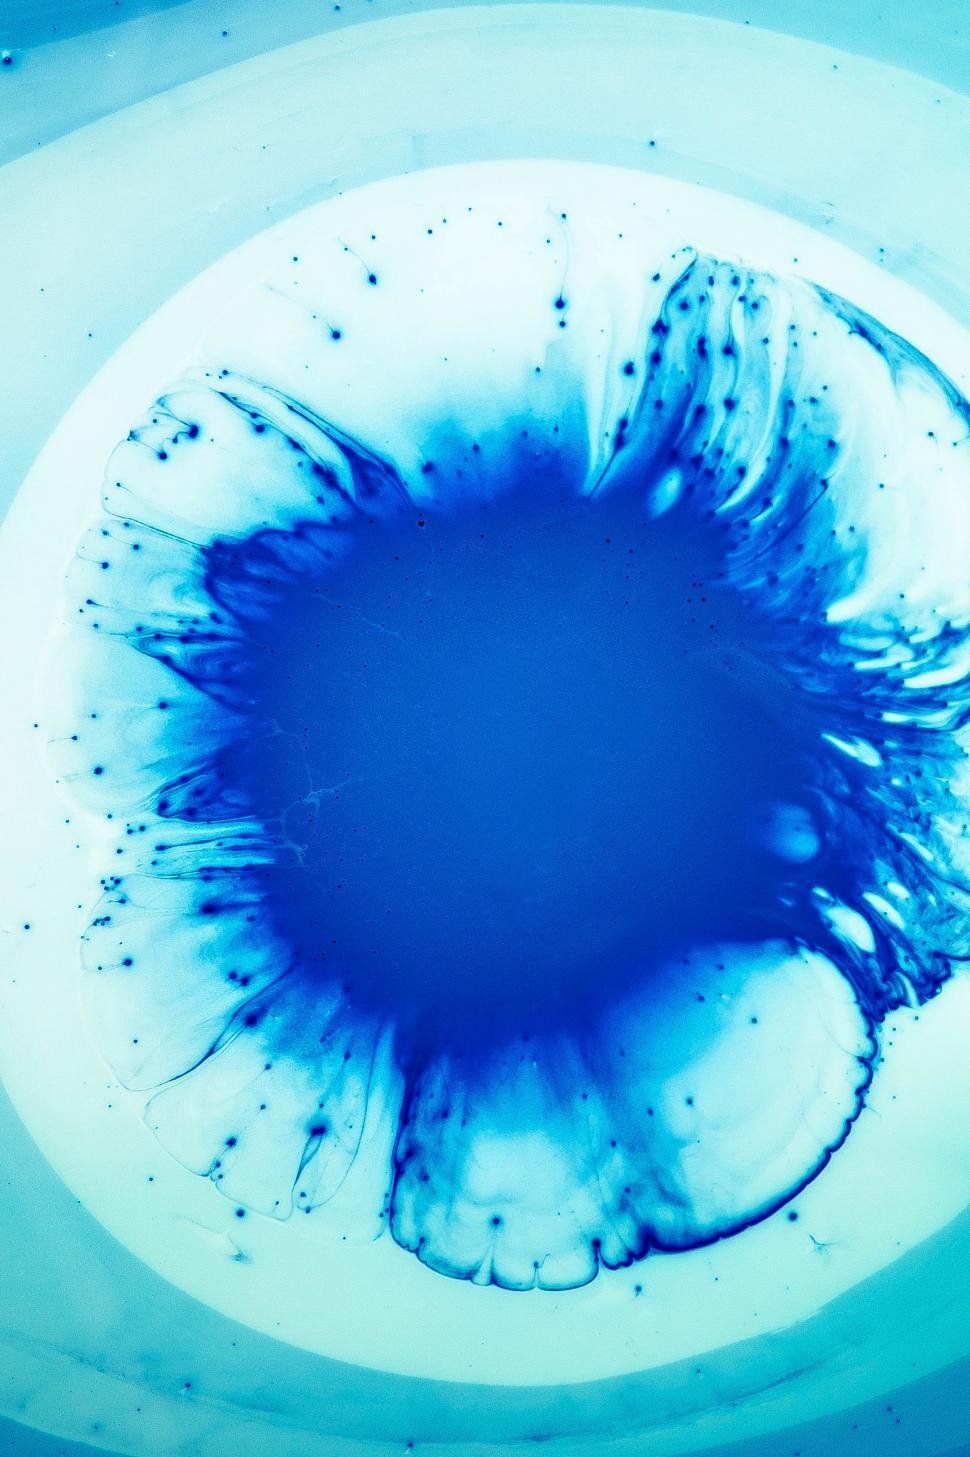 Free Image of Close Up of Blue Substance Dissolving in Water 